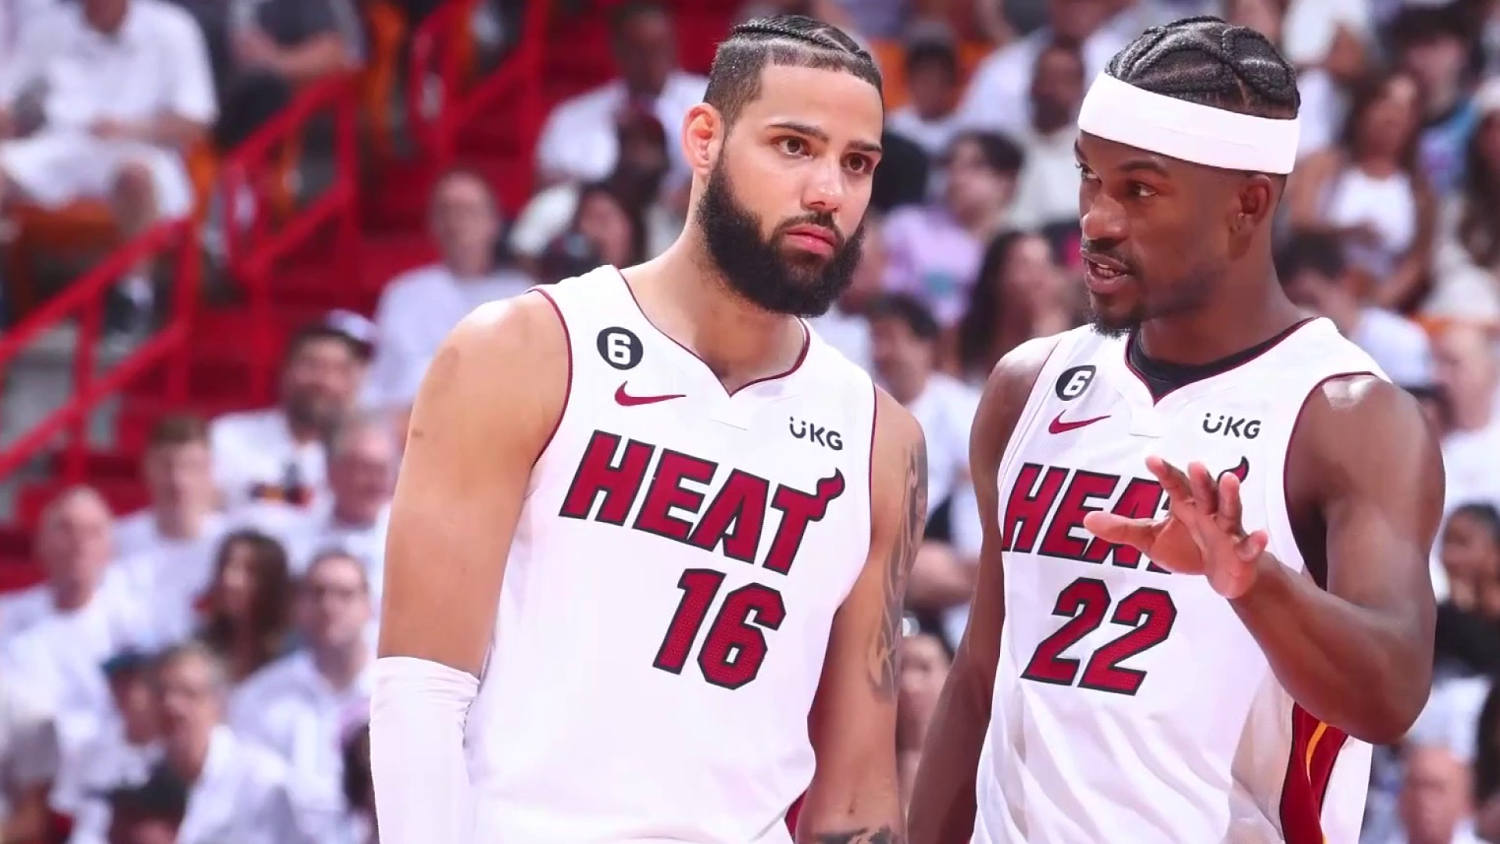 Cignal TV on X: And then, there were two. The Miami Heat became the second  eighth seed to reach the NBA Finals after the New York Knicks in 1999. Who  you got